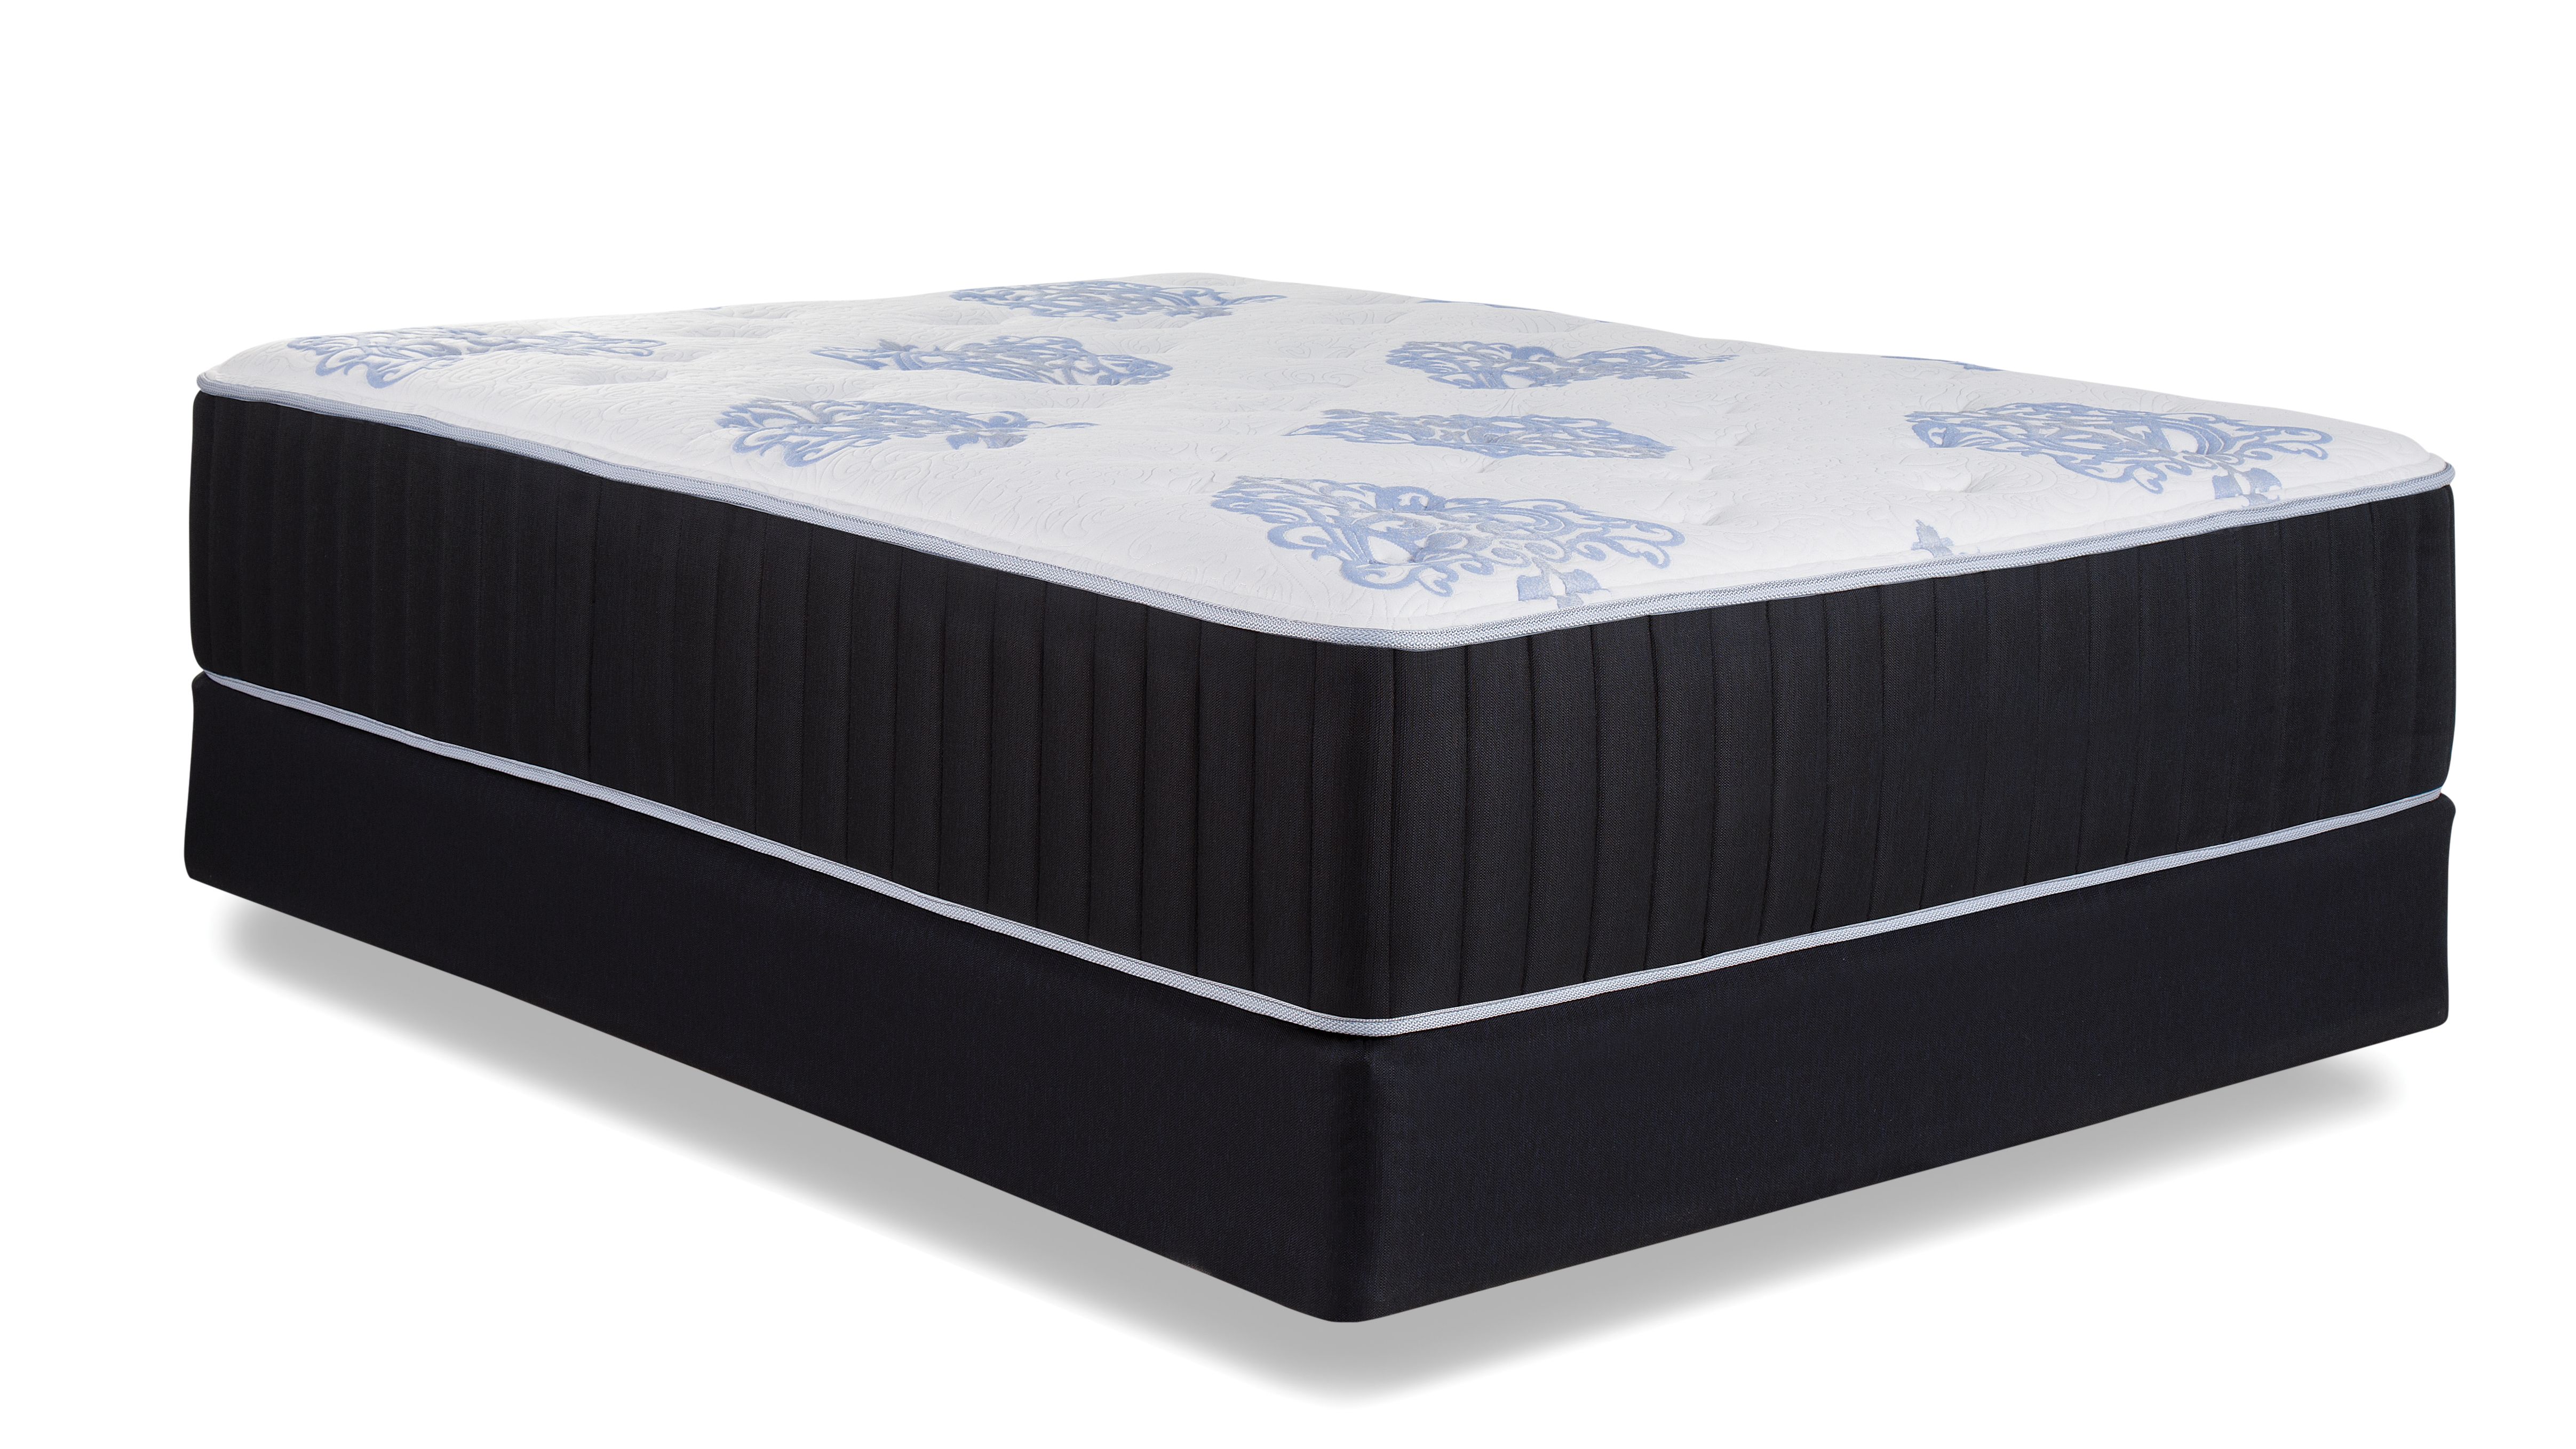 Southerland Sable Luxury Firm King Mattress